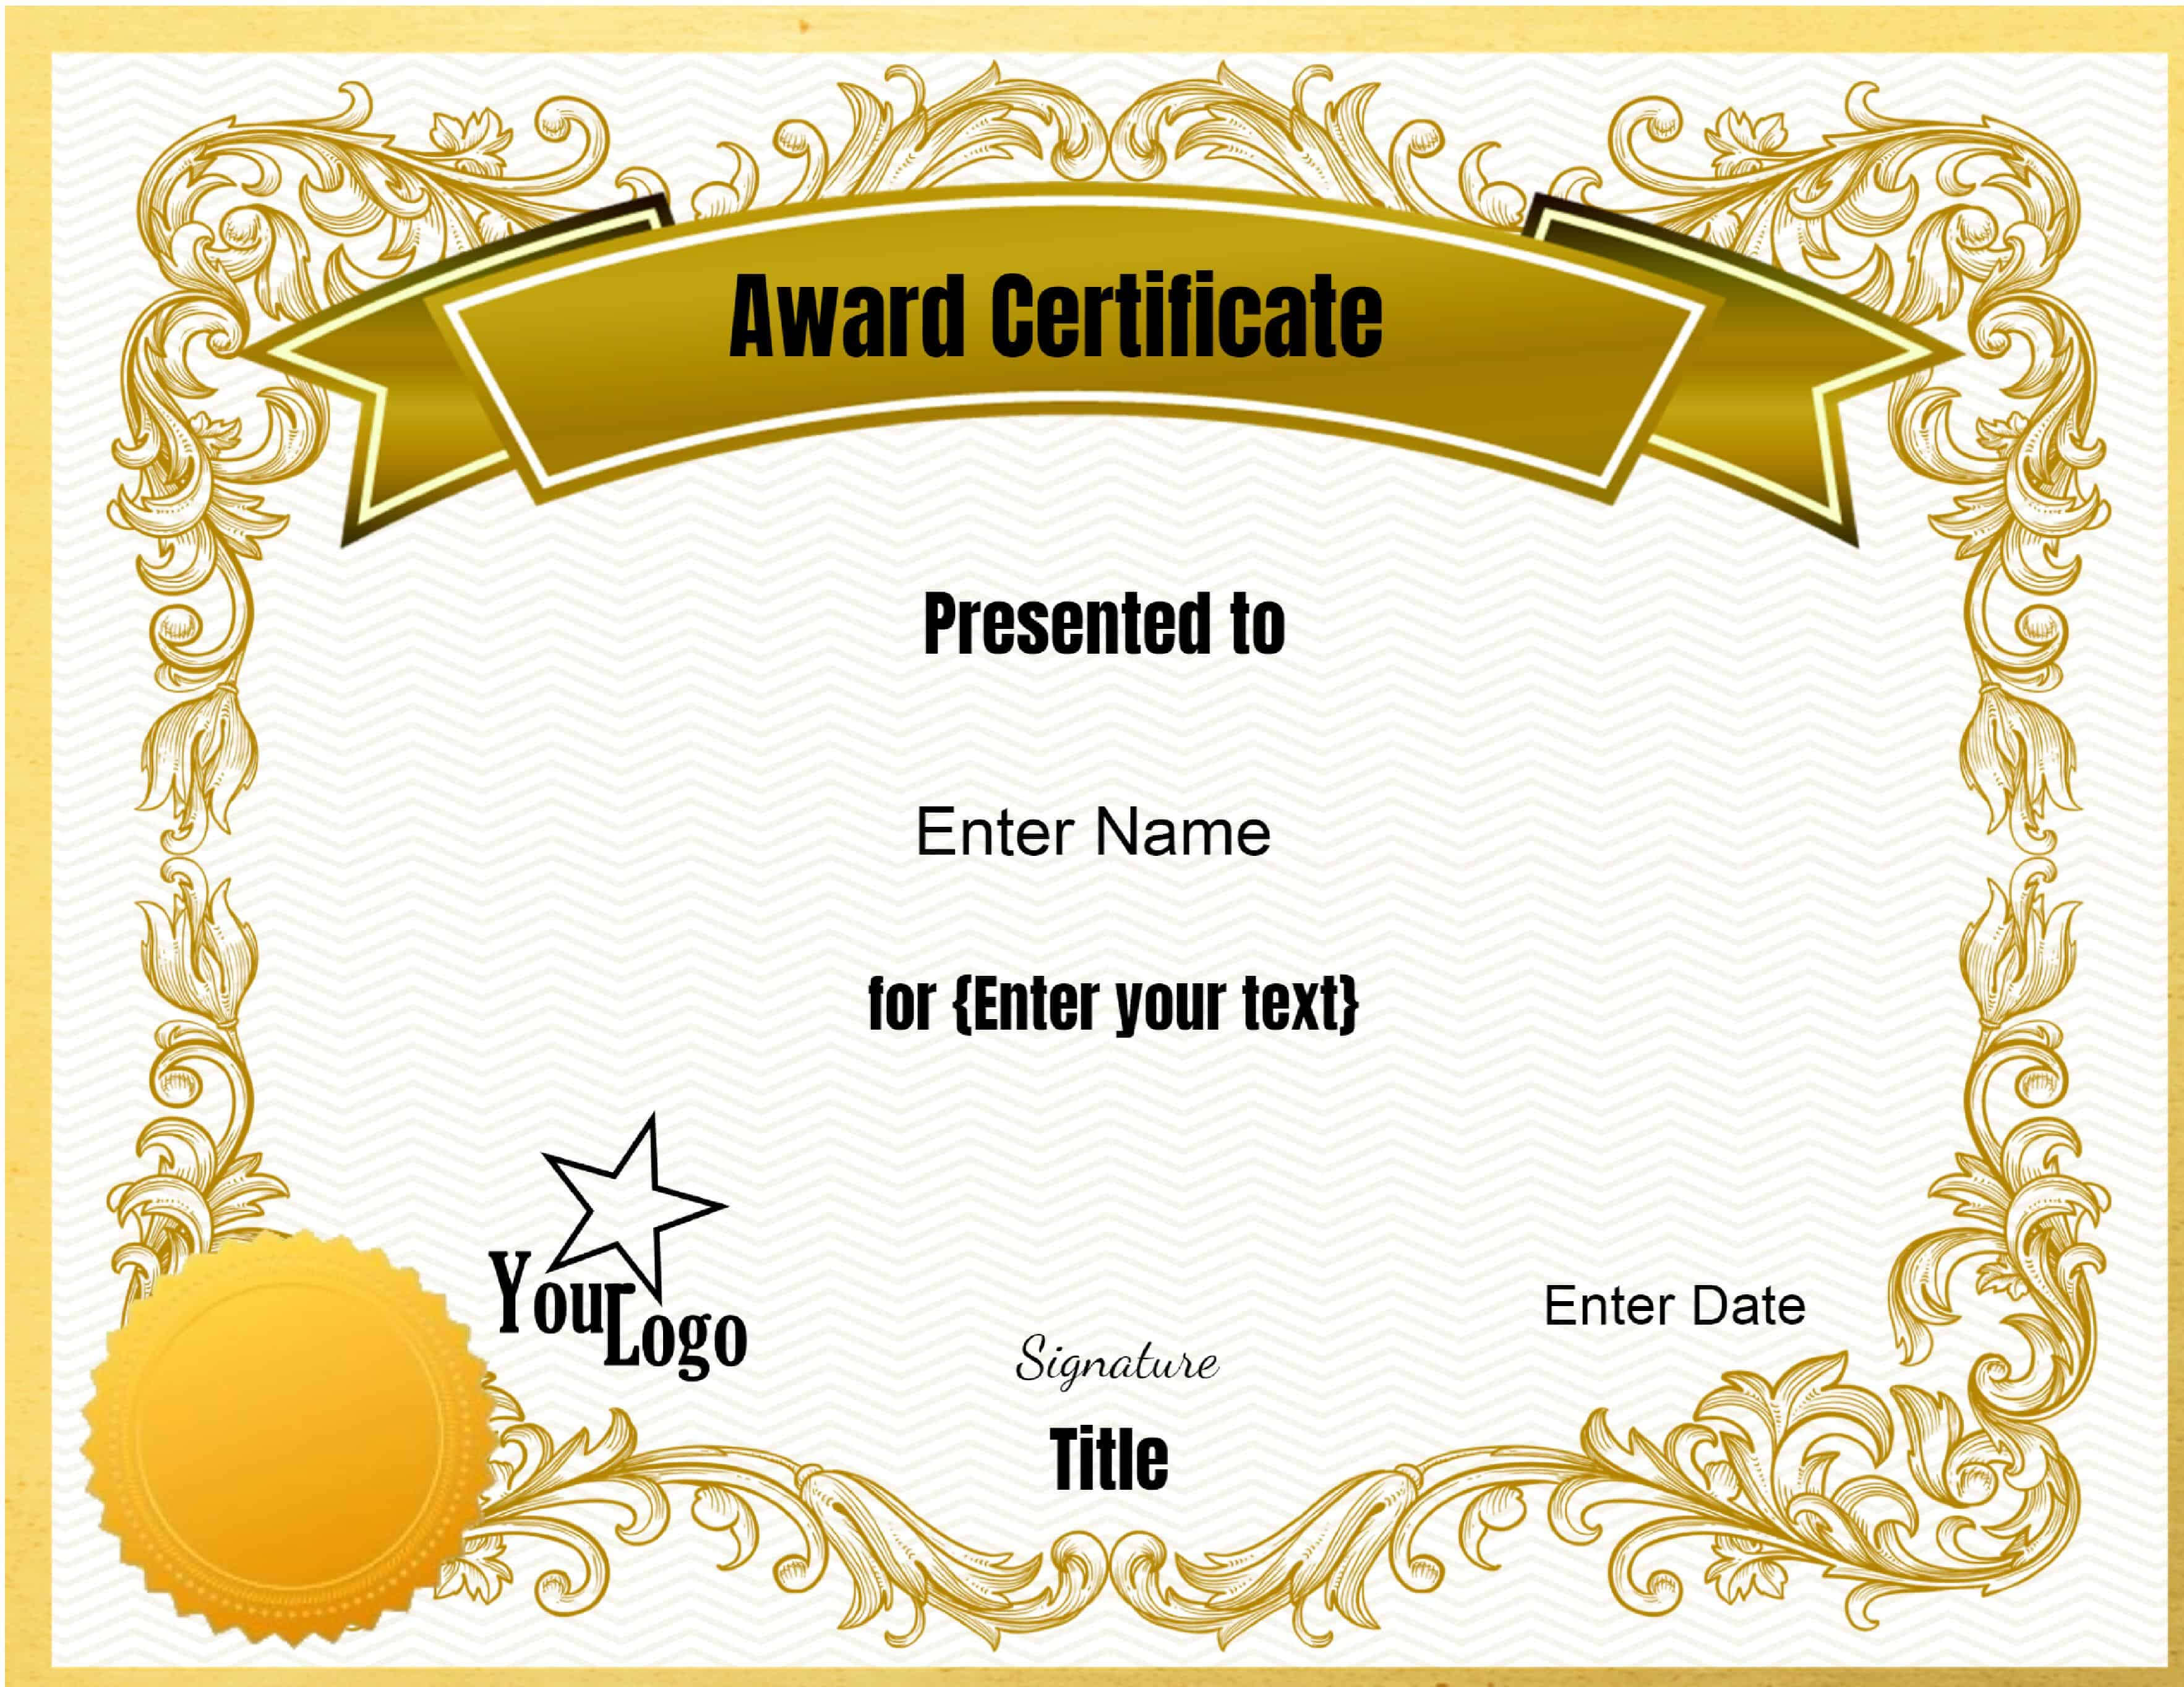 Free Printable Soccer Certificate Templates Award Throughout Free Printable Blank Award Certificate Templates